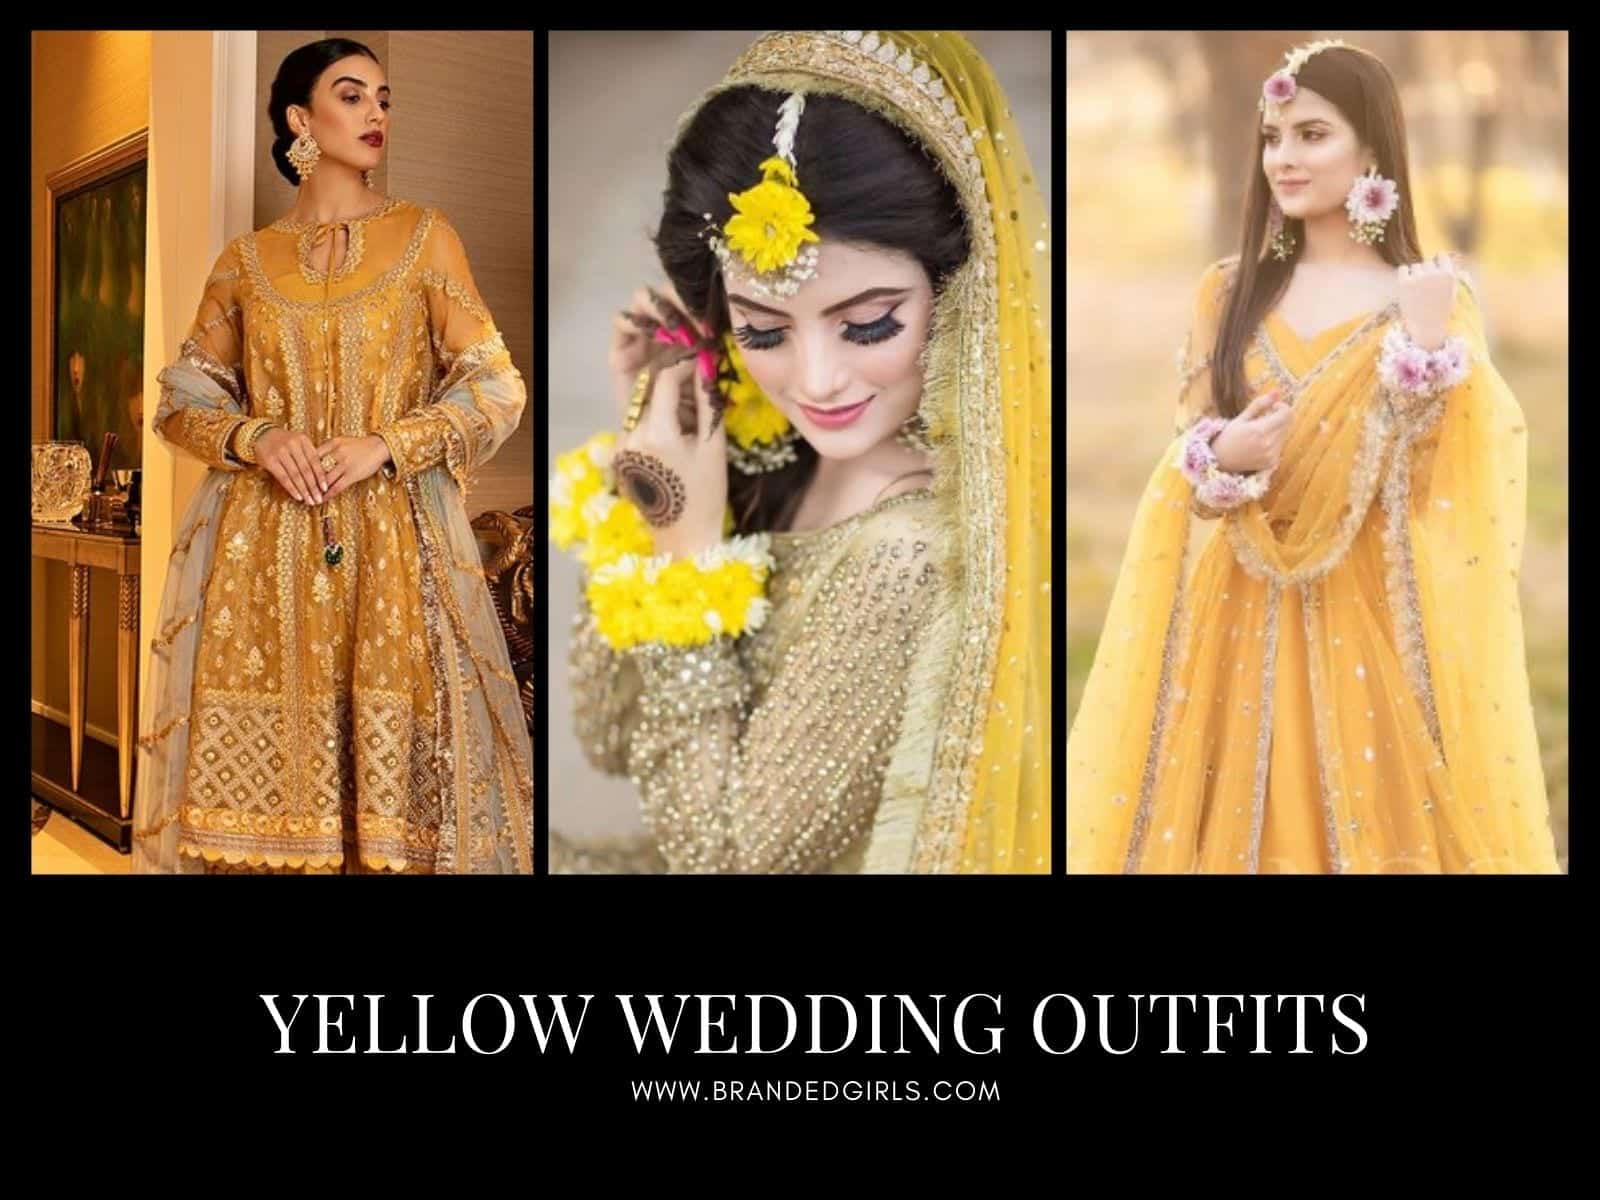 Meeras by Nilofer Shahid - 'Lucknow Mayun' An eastern traditional dress  which is intricate and highly technical in structure. It has an olive  greenjamawar blouse with net sleeves. The upper gracefully flowing